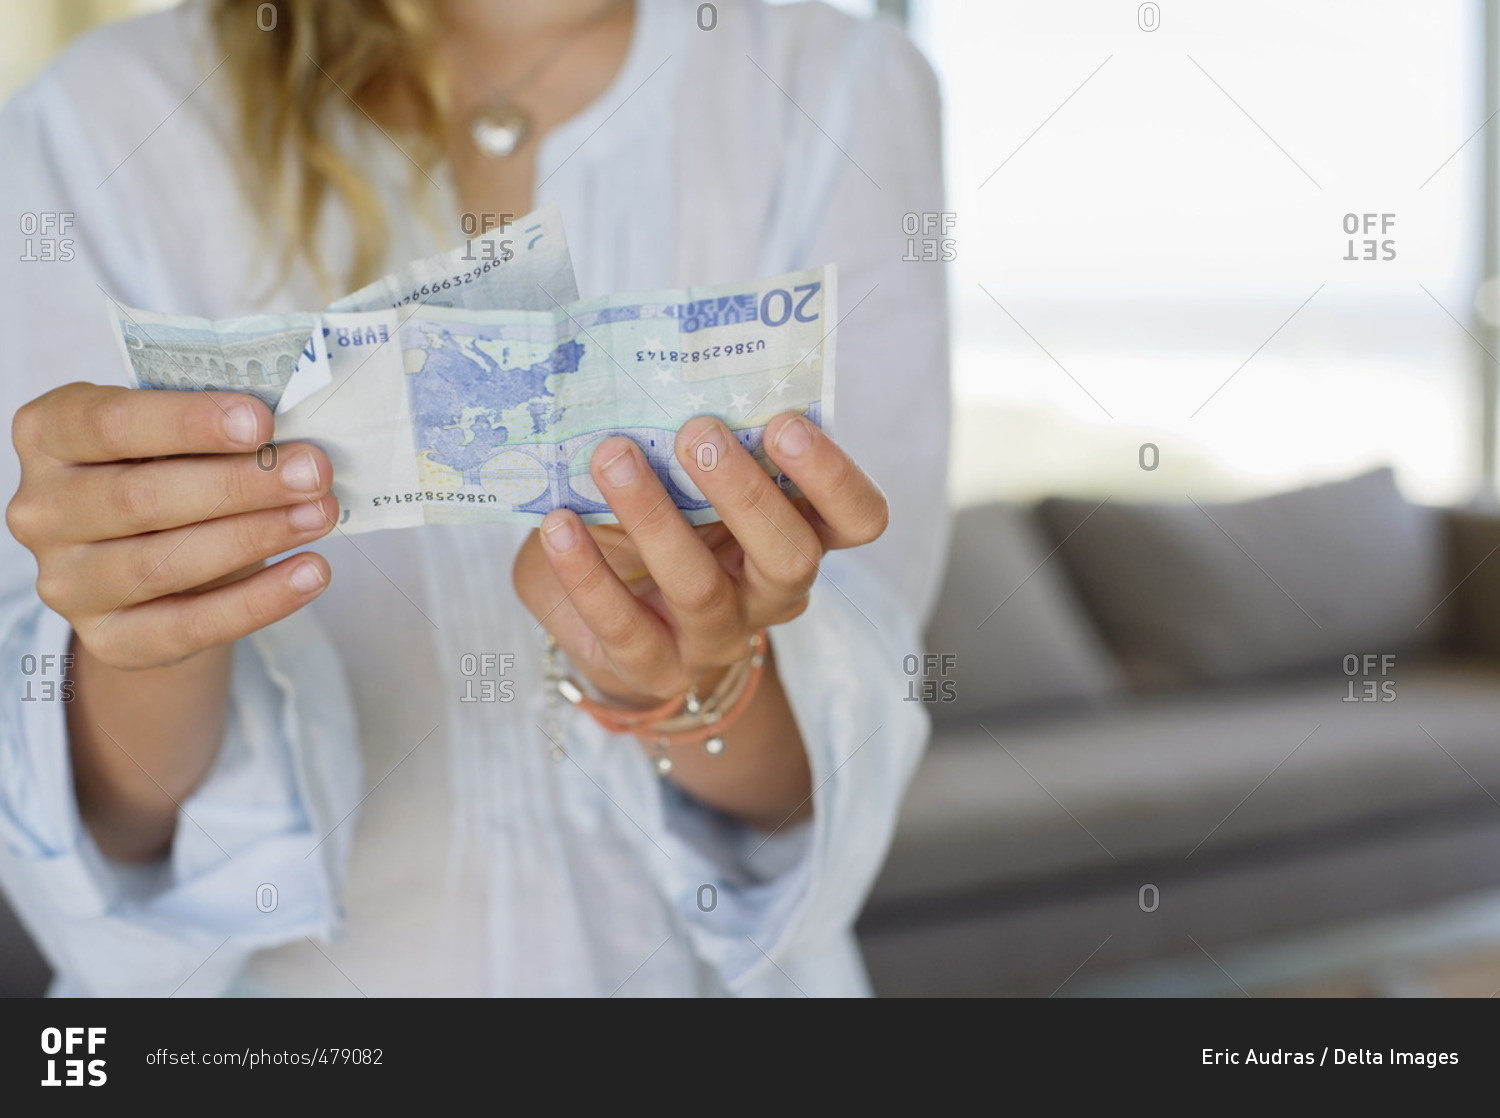 Mid section view of a girl holding paper currency